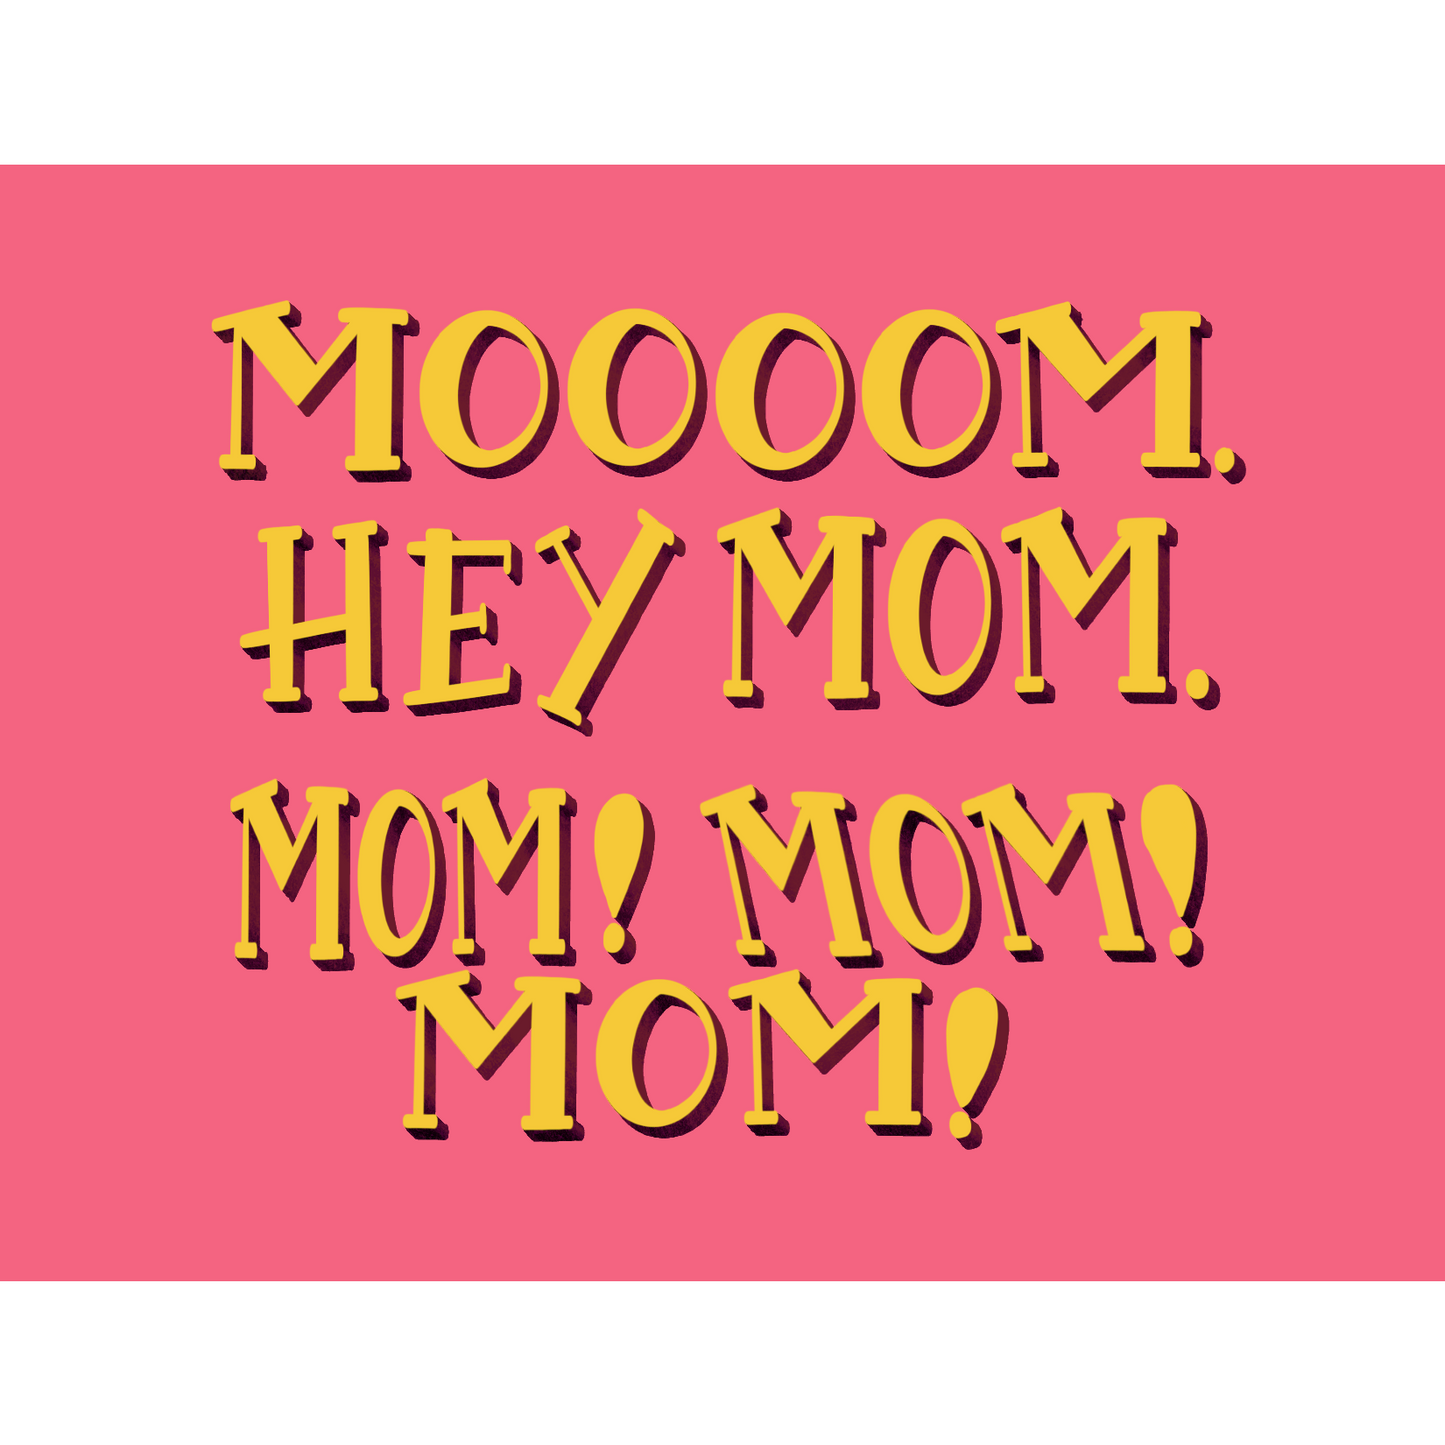 Hey Mom! Card - Mother's Day Card | Funny Card, Mom, Mommy